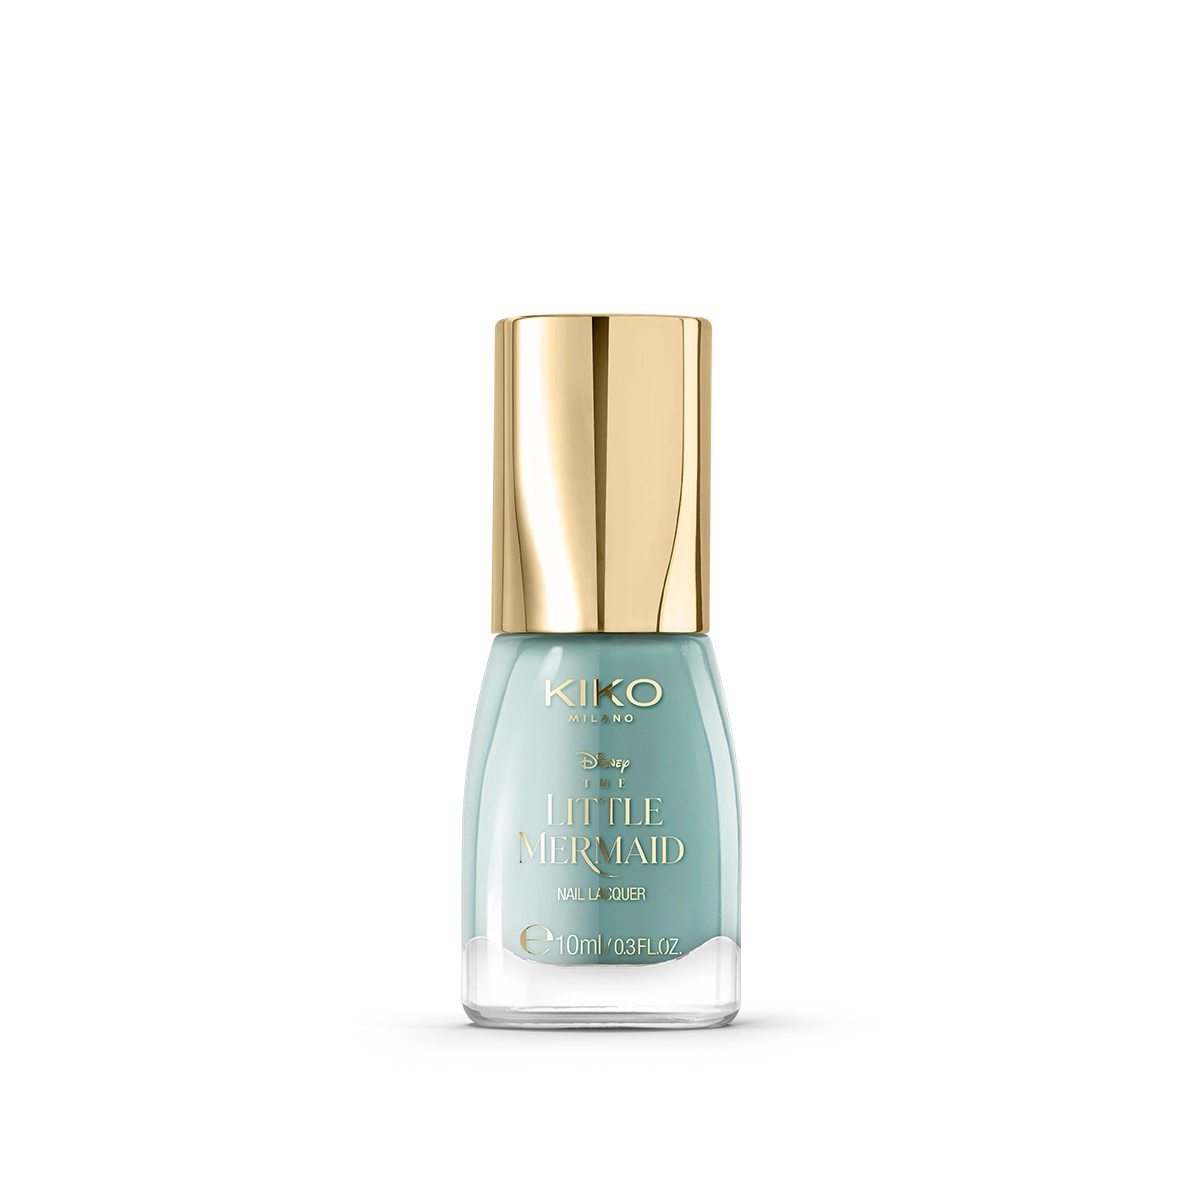 Disney - The Little Mermaid Nail Lacquer